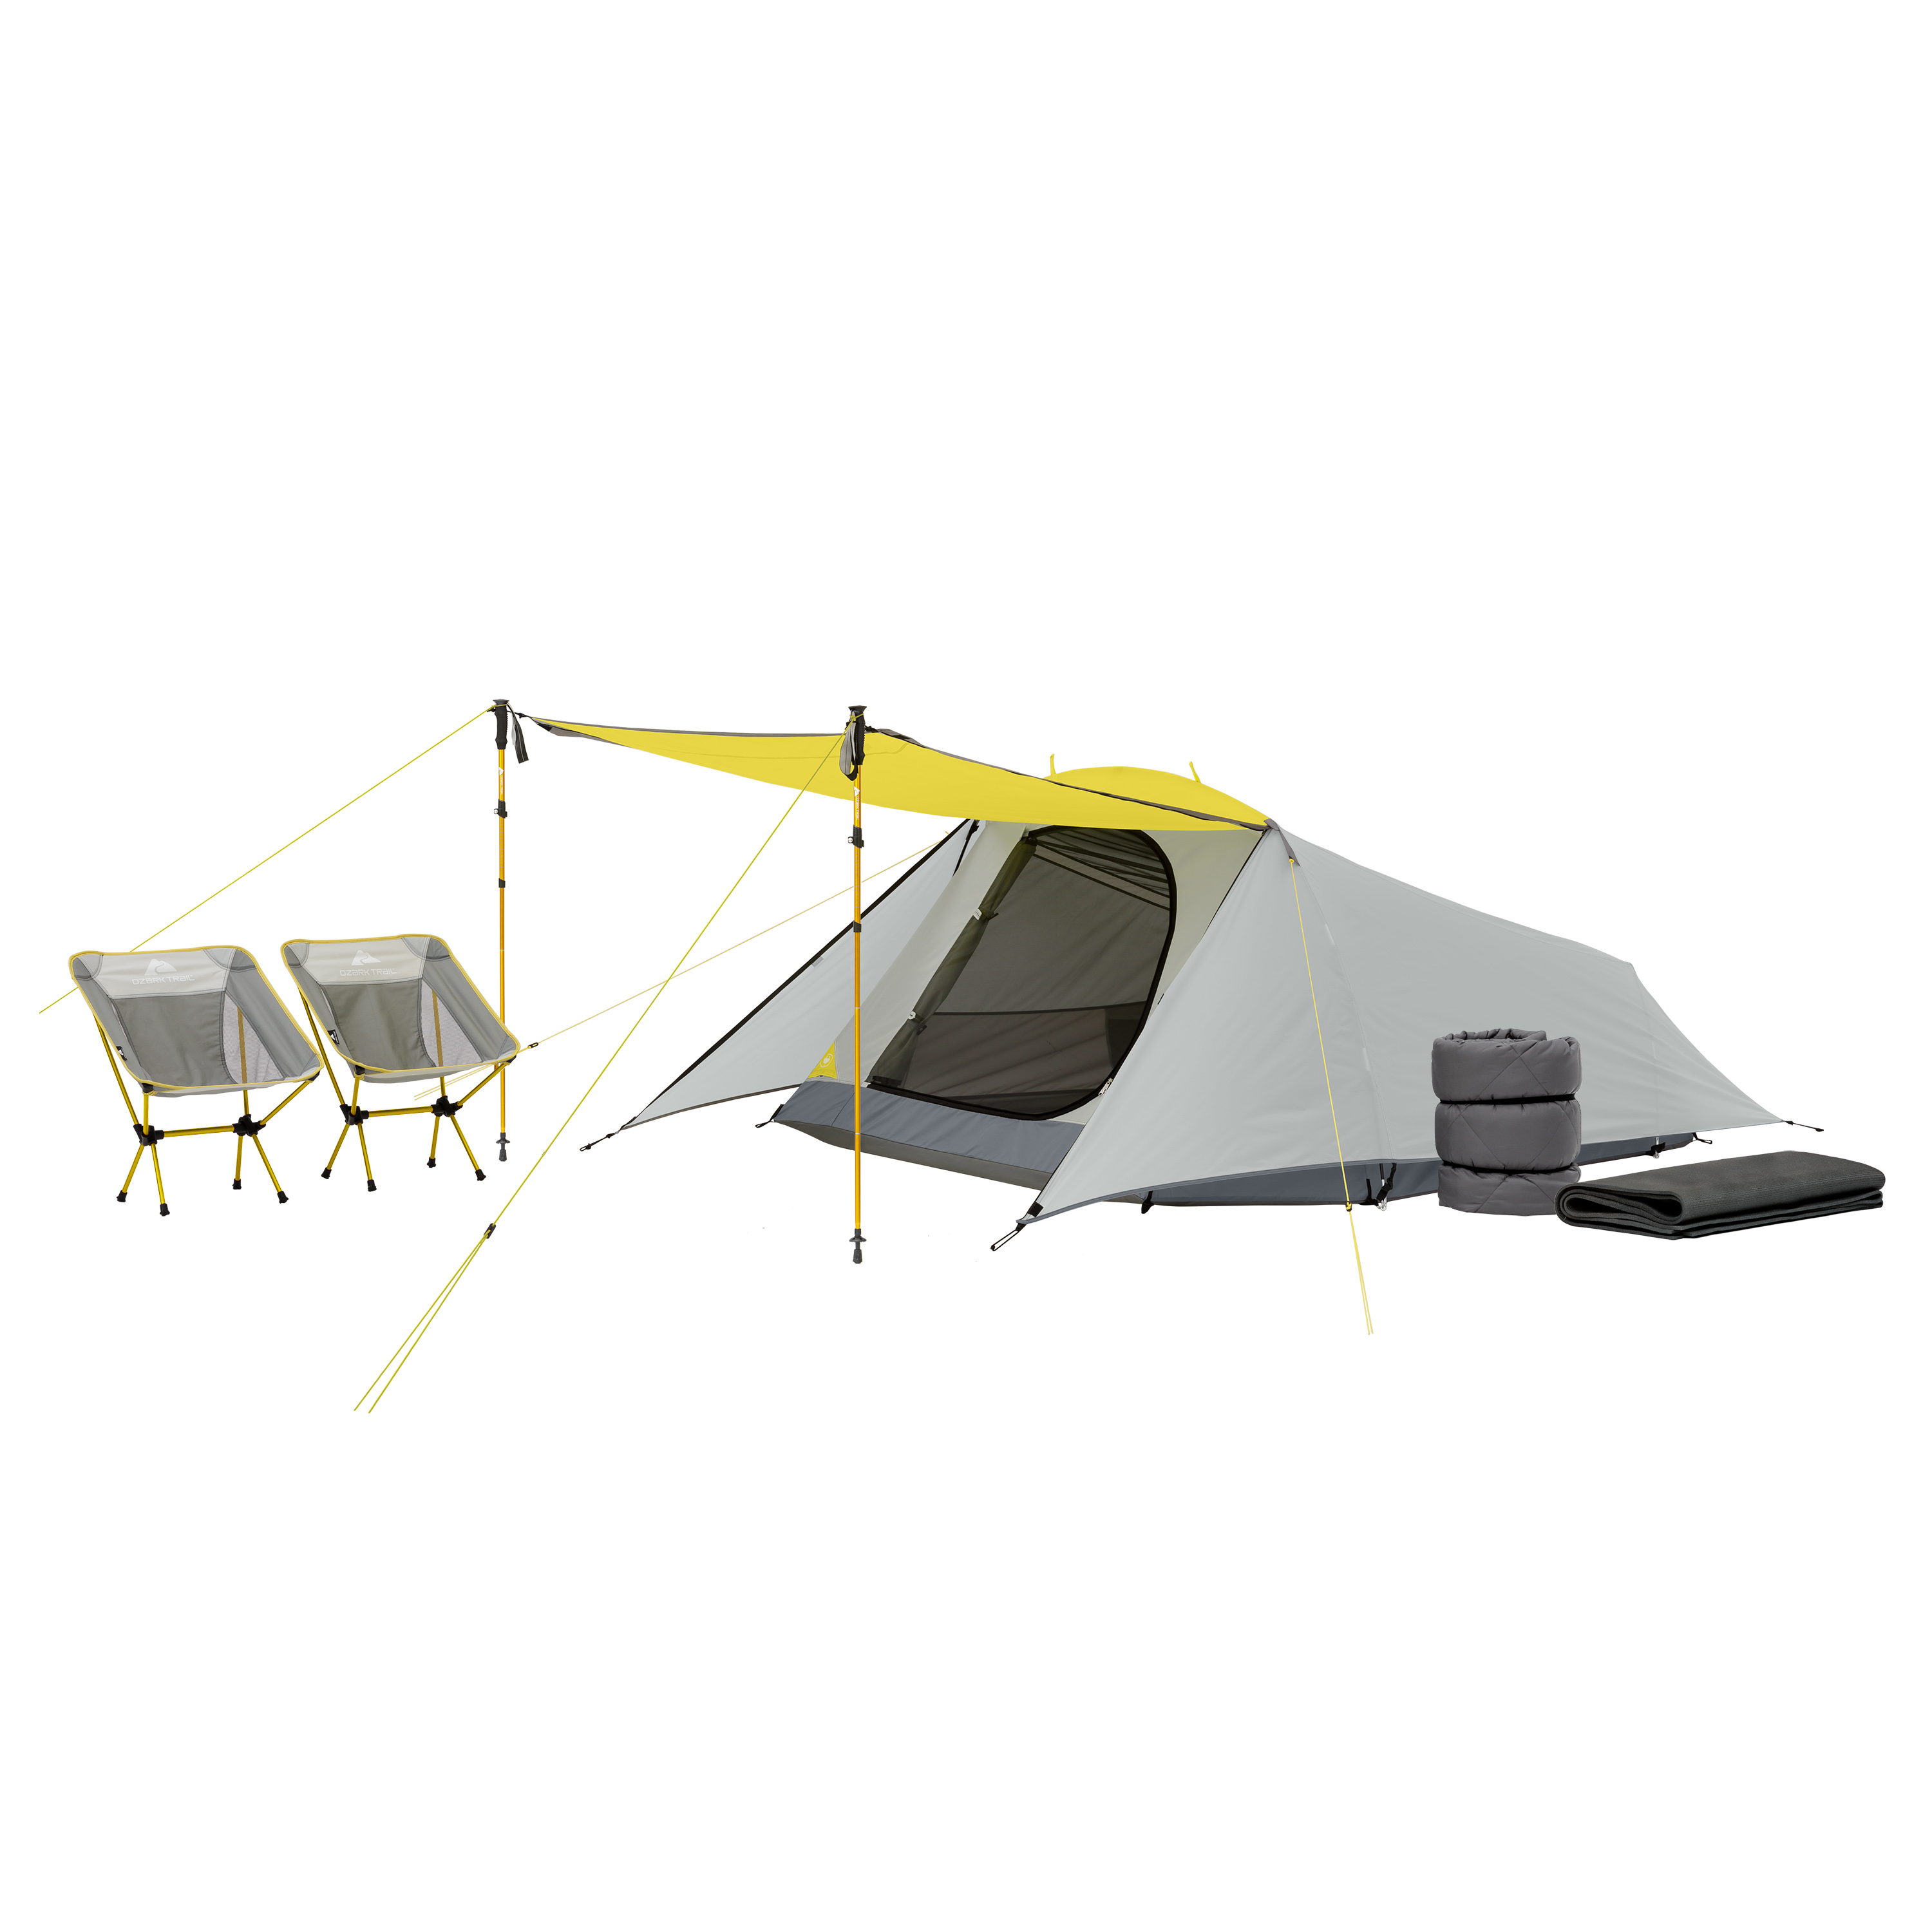 Ozark Trail 3-Person 16pc Camping Combo, Dome Tent with Rainfly, Trekking poles, Sleeping Bag, Sleeping Pad and Low-Back Chairs - image 1 of 12